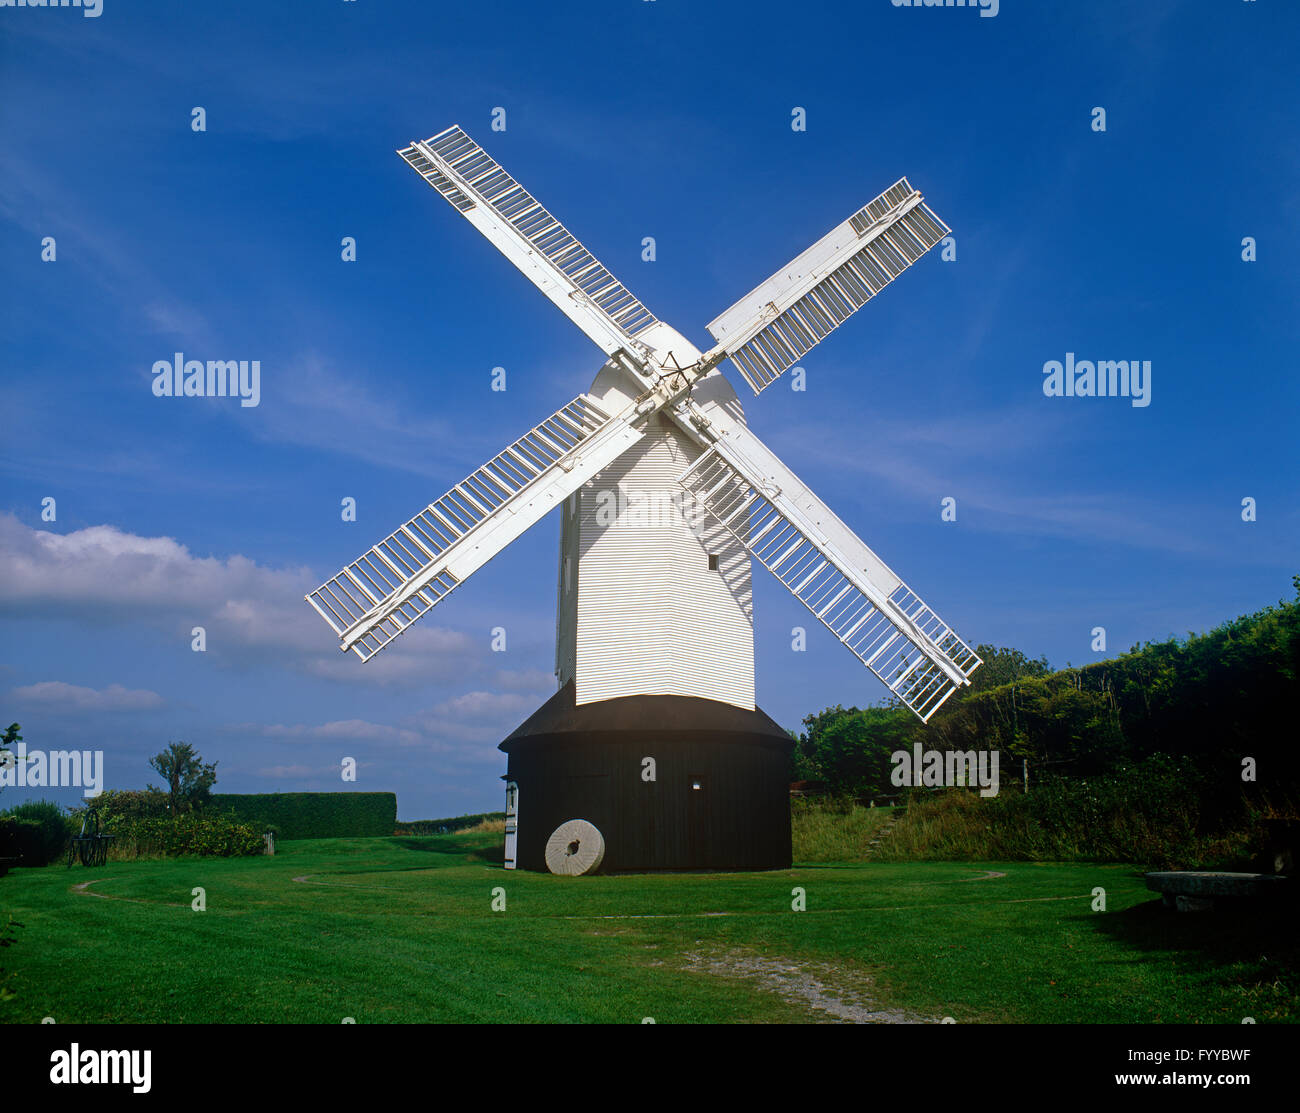 A white windmill on a hill, outside. Stock Photo